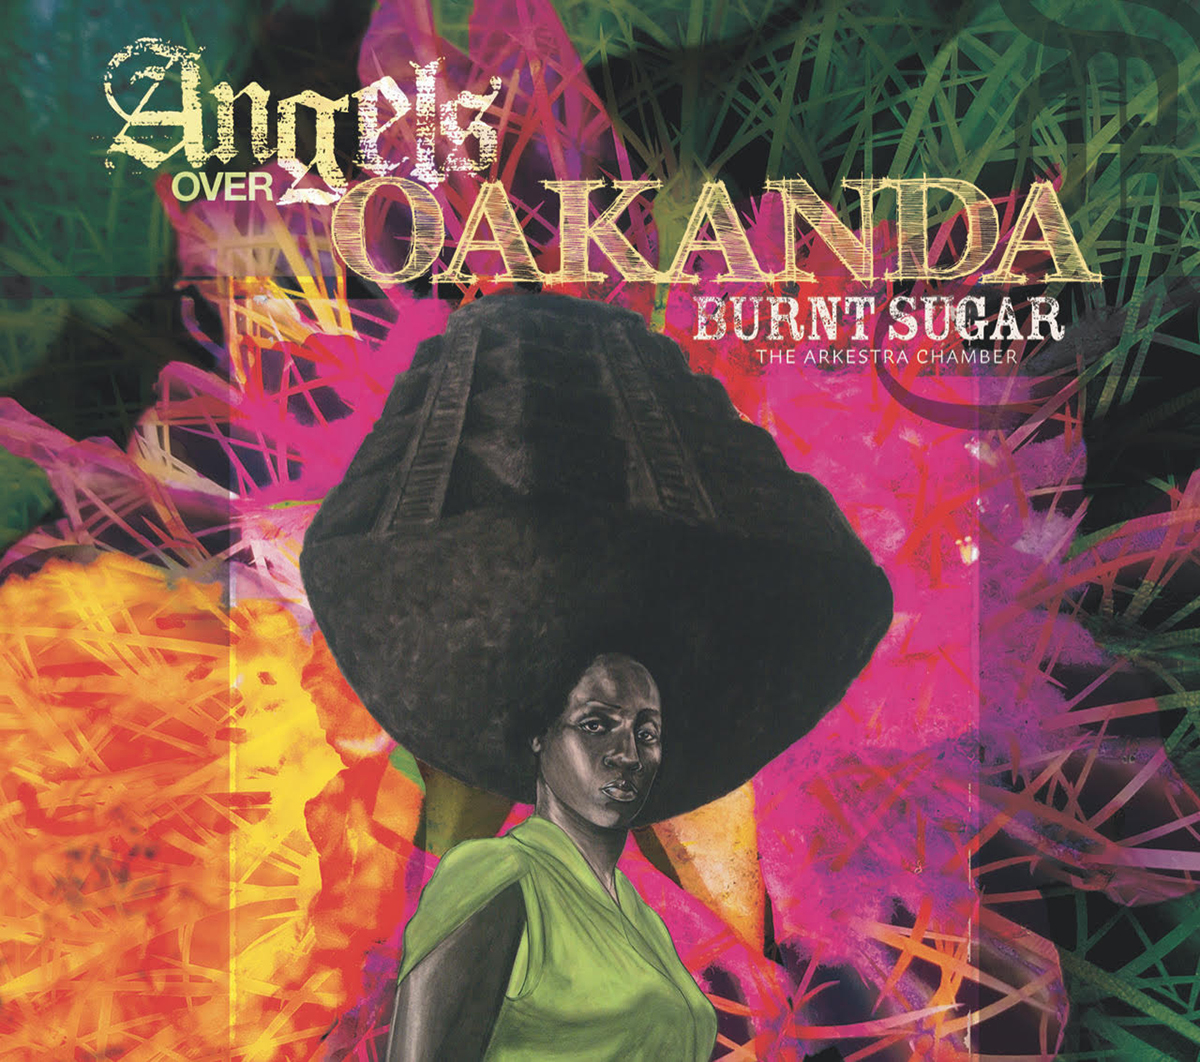 Album art featuring a woman with an afro wearing a green dress, upon a pink and orange background. The text reads "Angels over Oakanda, Burnt Sugar, The Arkestra Chamber."